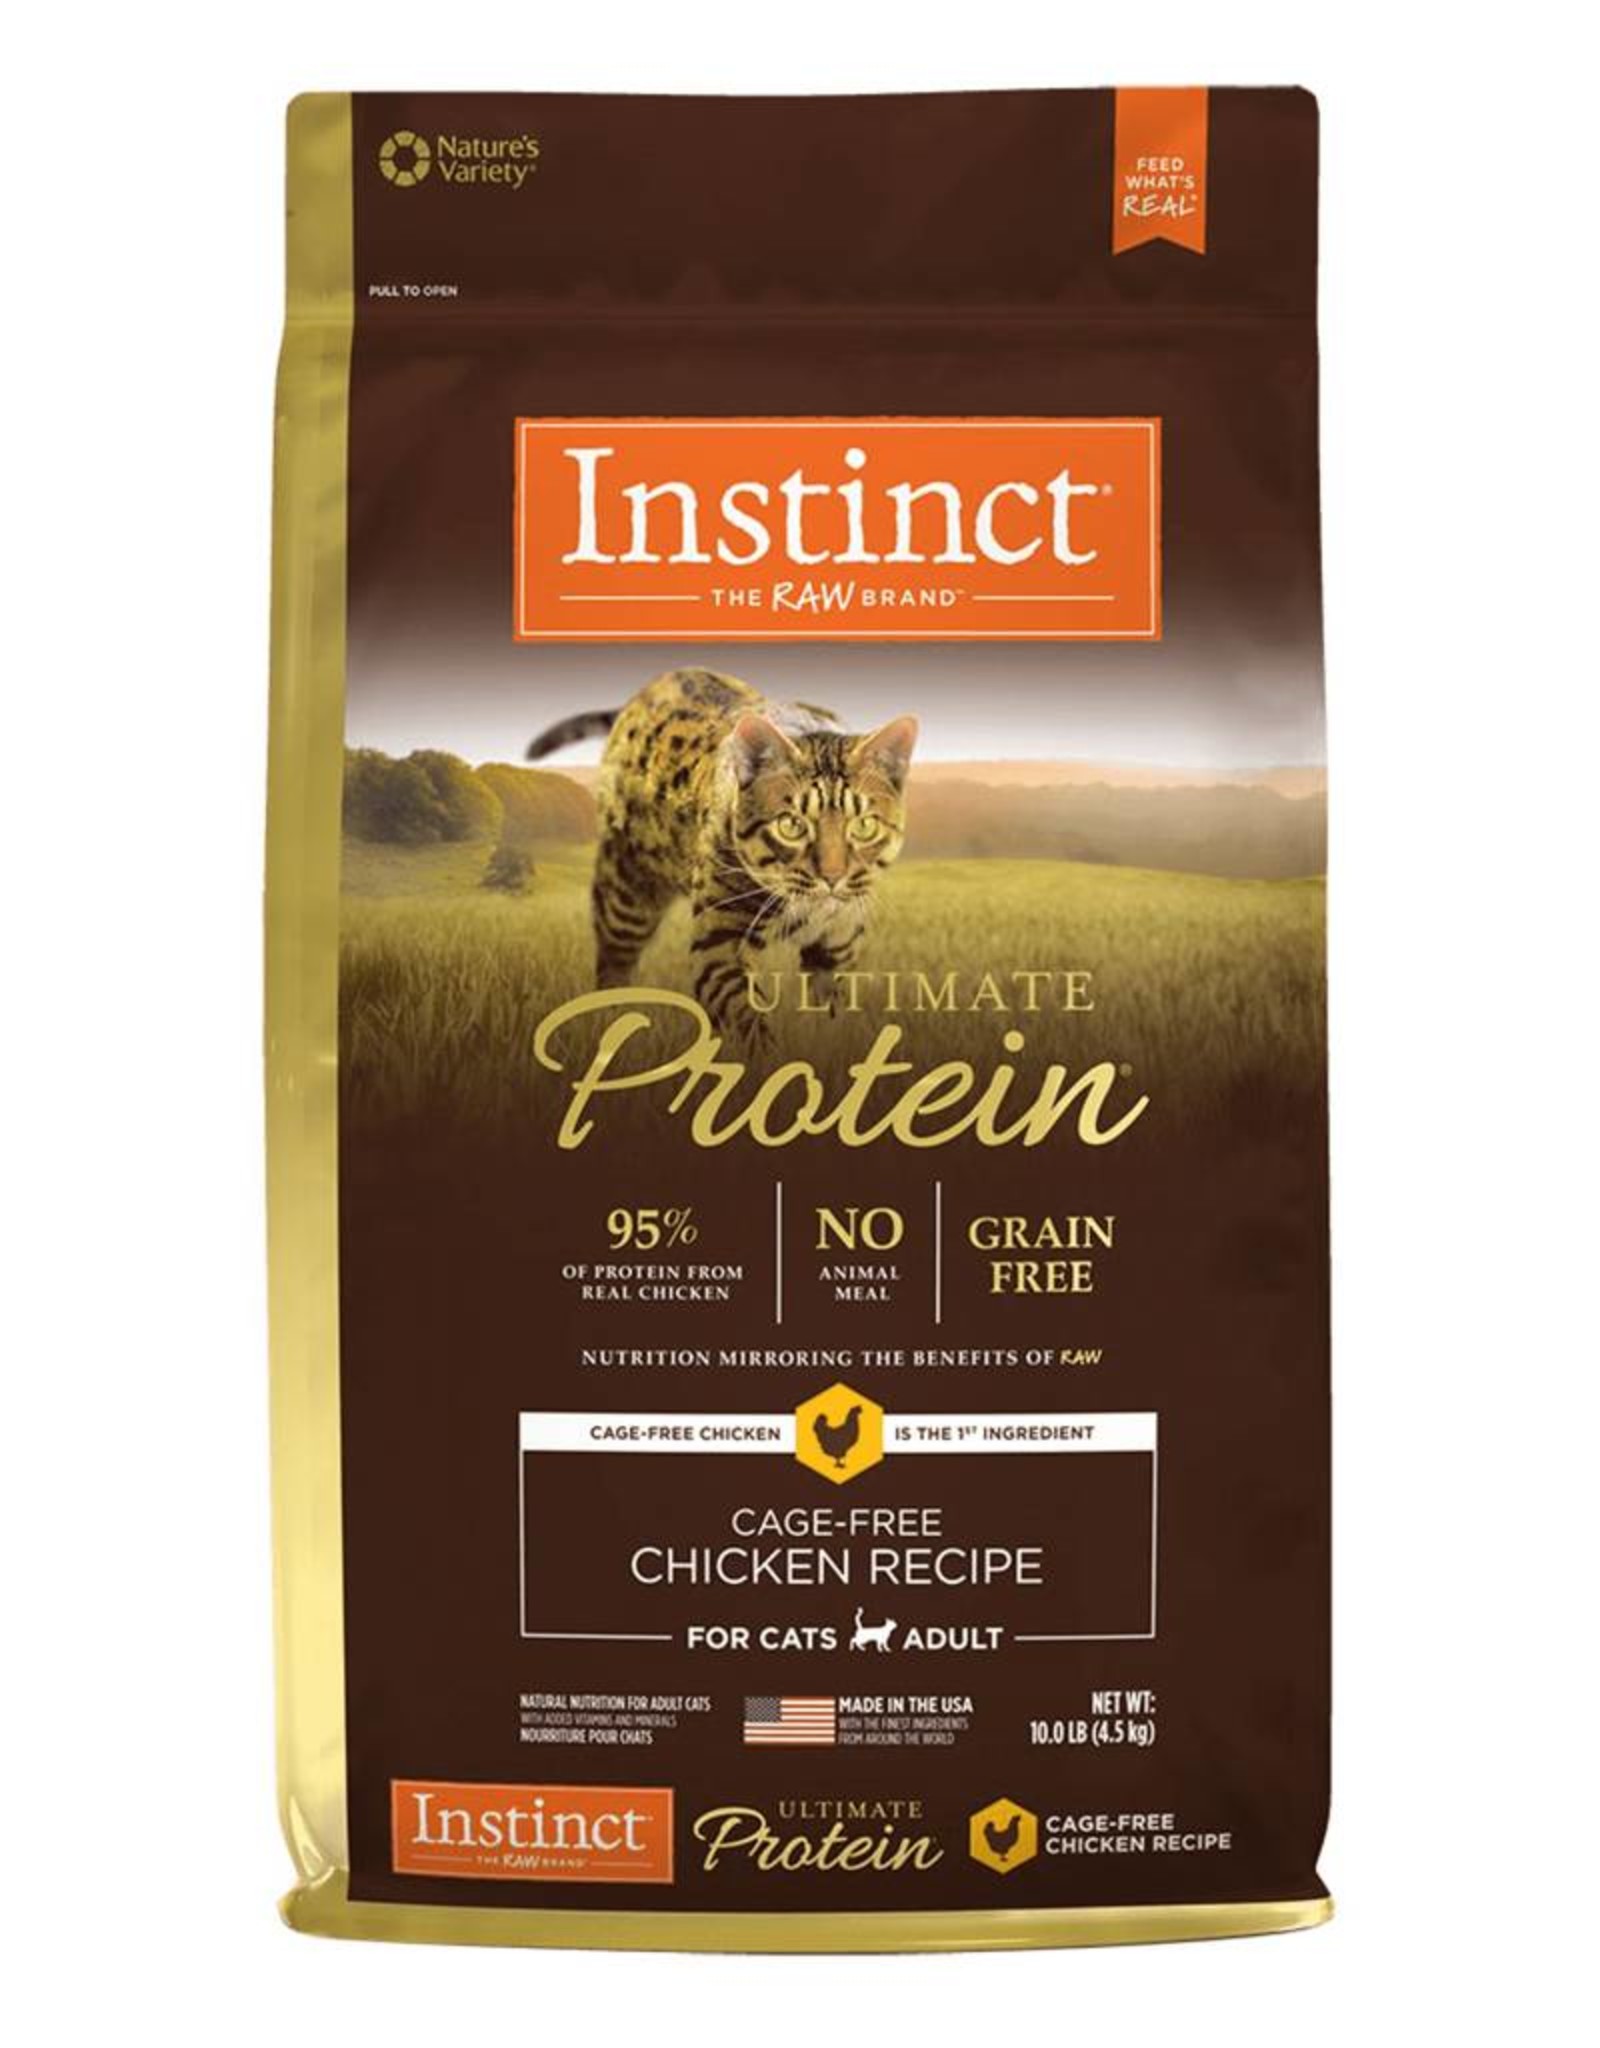 Nature's Variety Instinct Ultimate Protein Adult Grain Free Cage Free Chicken Recipe Natural Dry Cat Food 10lb